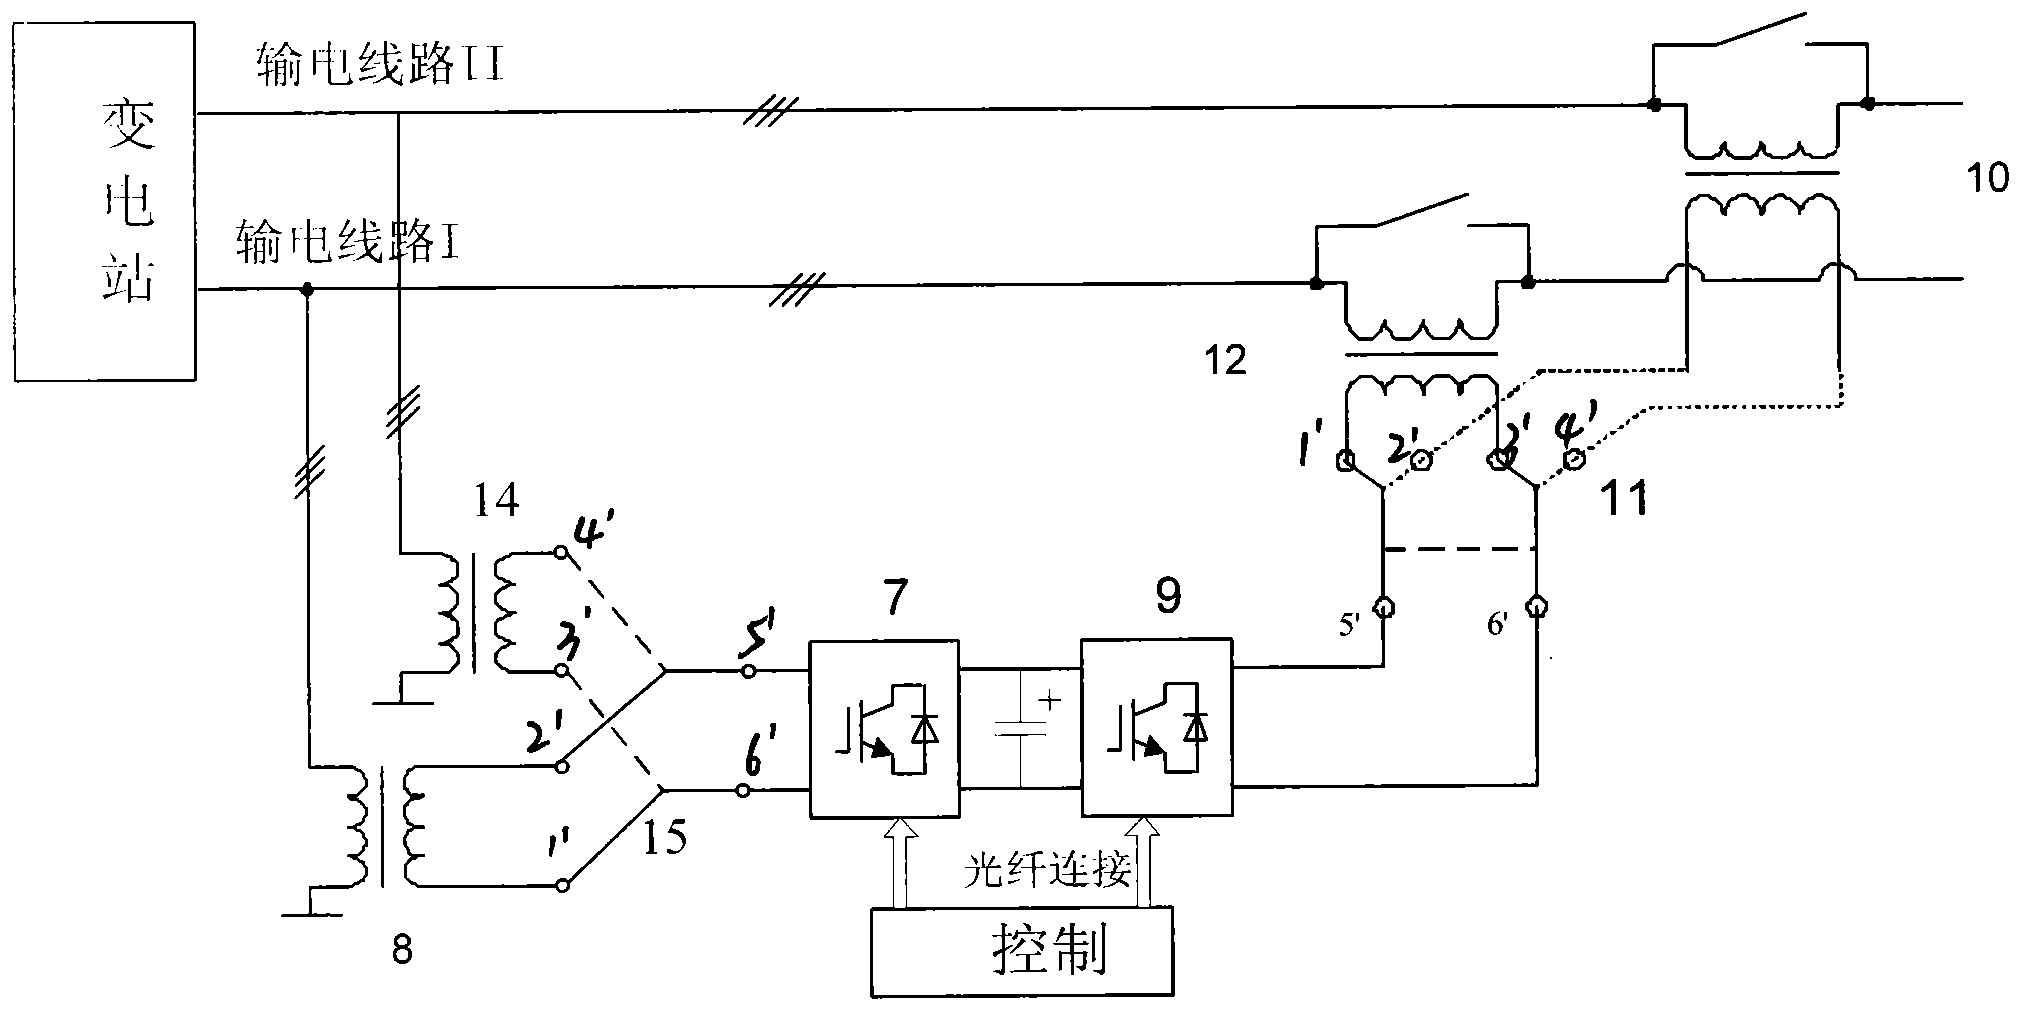 Convertible static compensator provided with modular multilevel converter structure